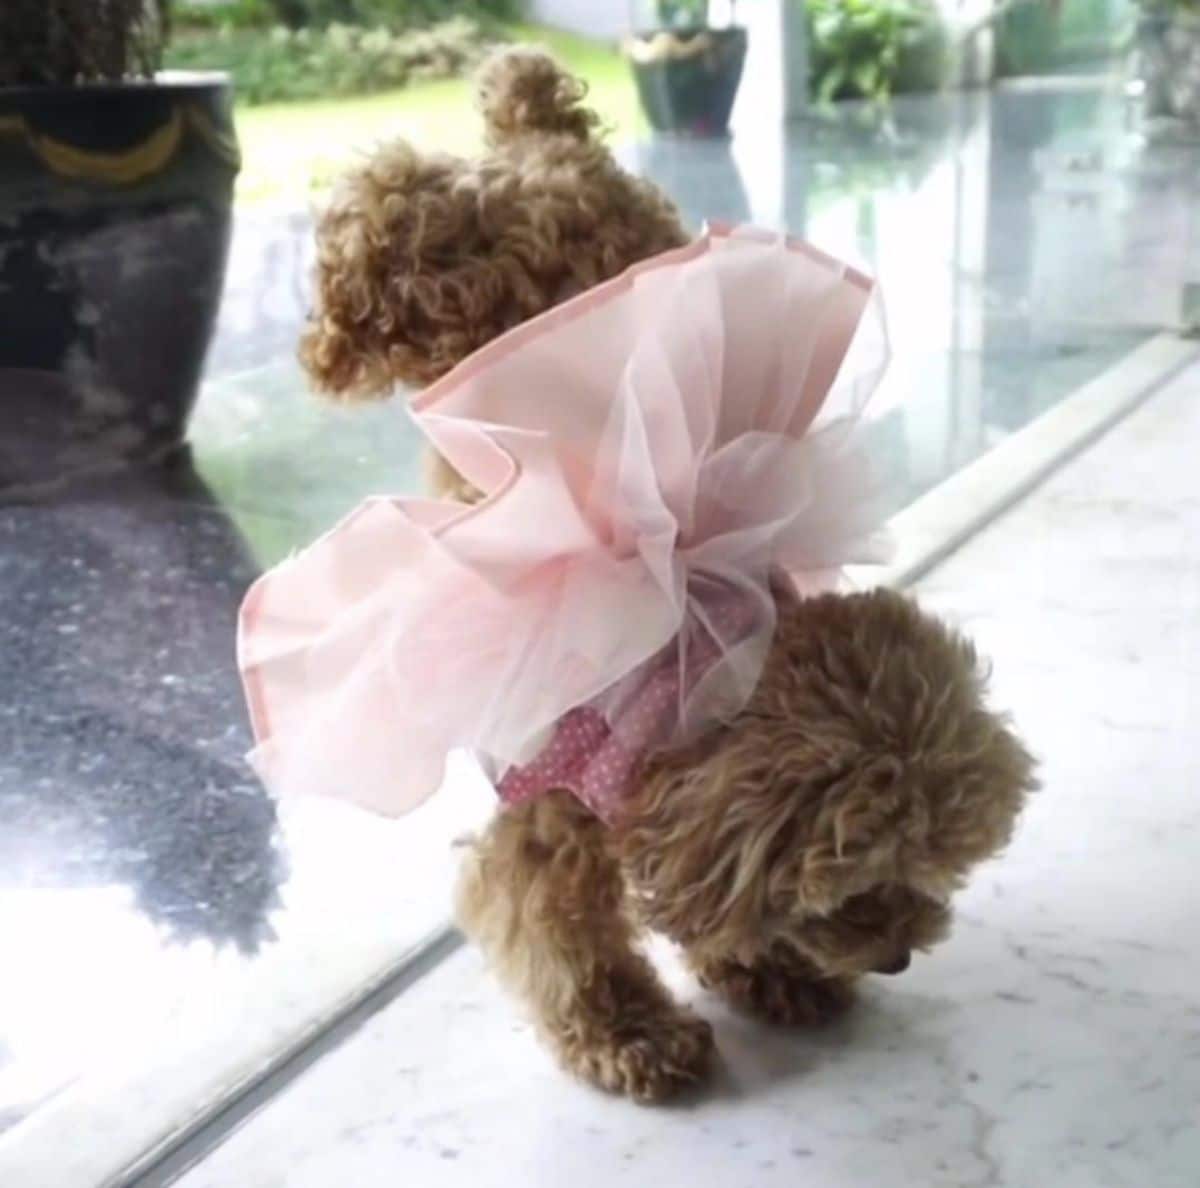 small brown poodle in a pink dress and tutu standing with the hind legs against a glass door